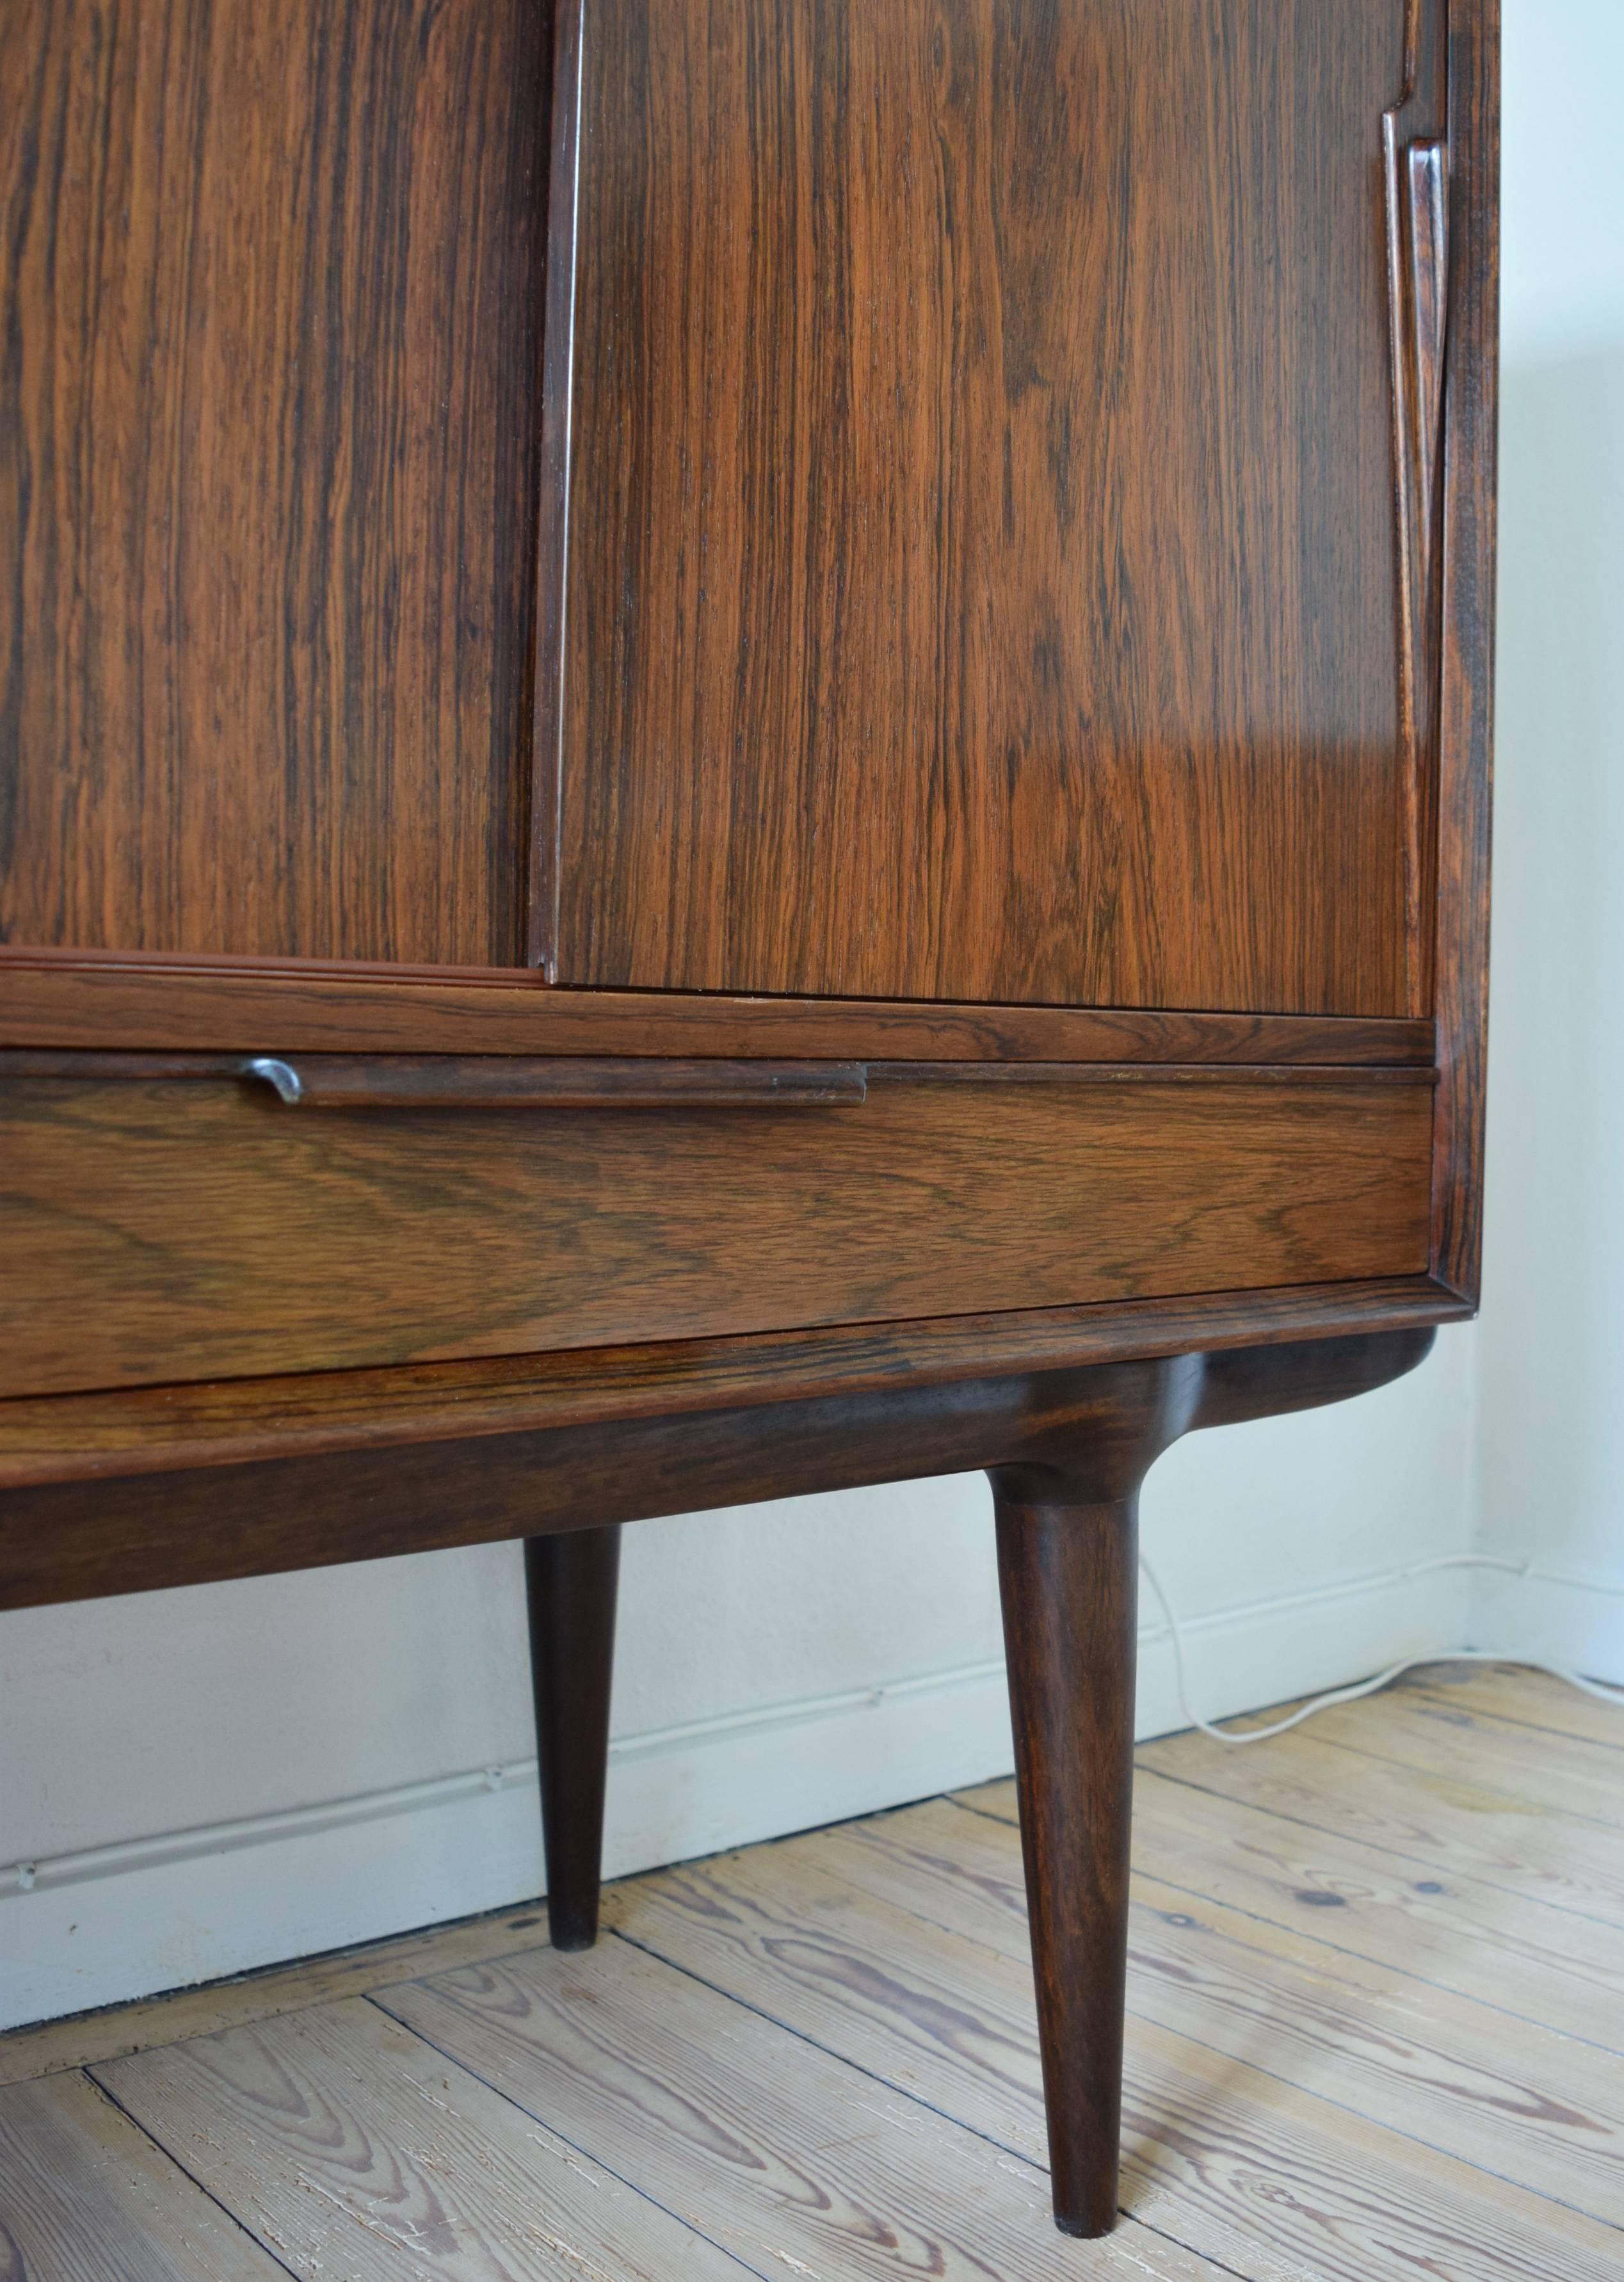 Iconic rosewood credenza manufactured by Omann Jun of Denmark in the 1960s. This particular piece in in a very good condition for its vintage and features four sliding doors and two smooth drawers. Inside are more drawers and shelves with the